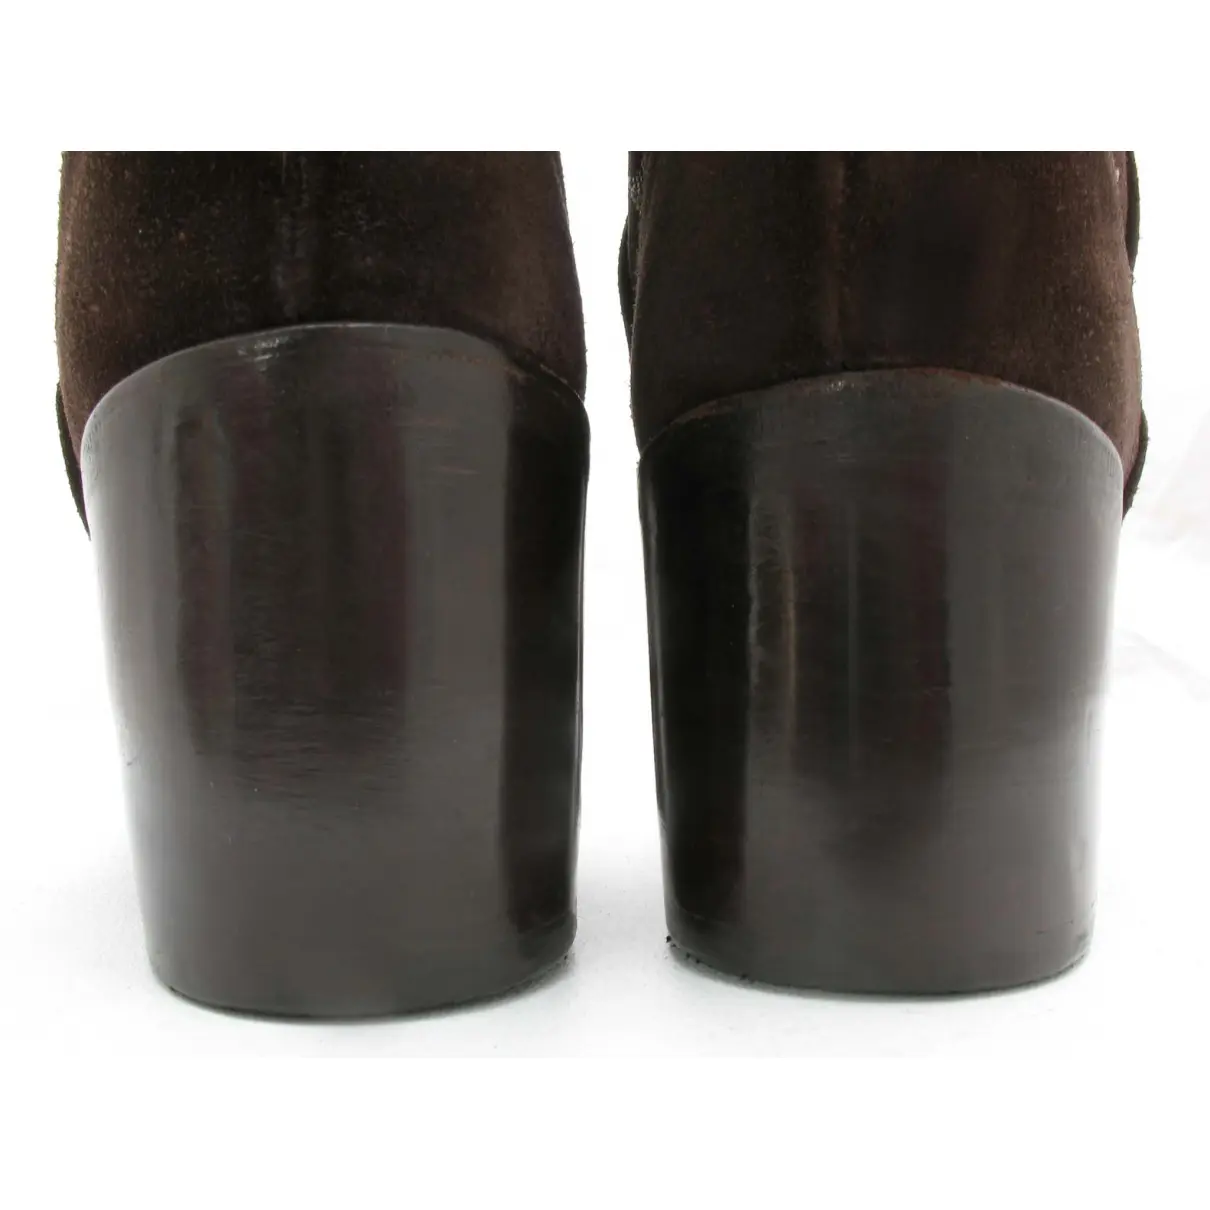 Buy Free Lance Cowboy boots online